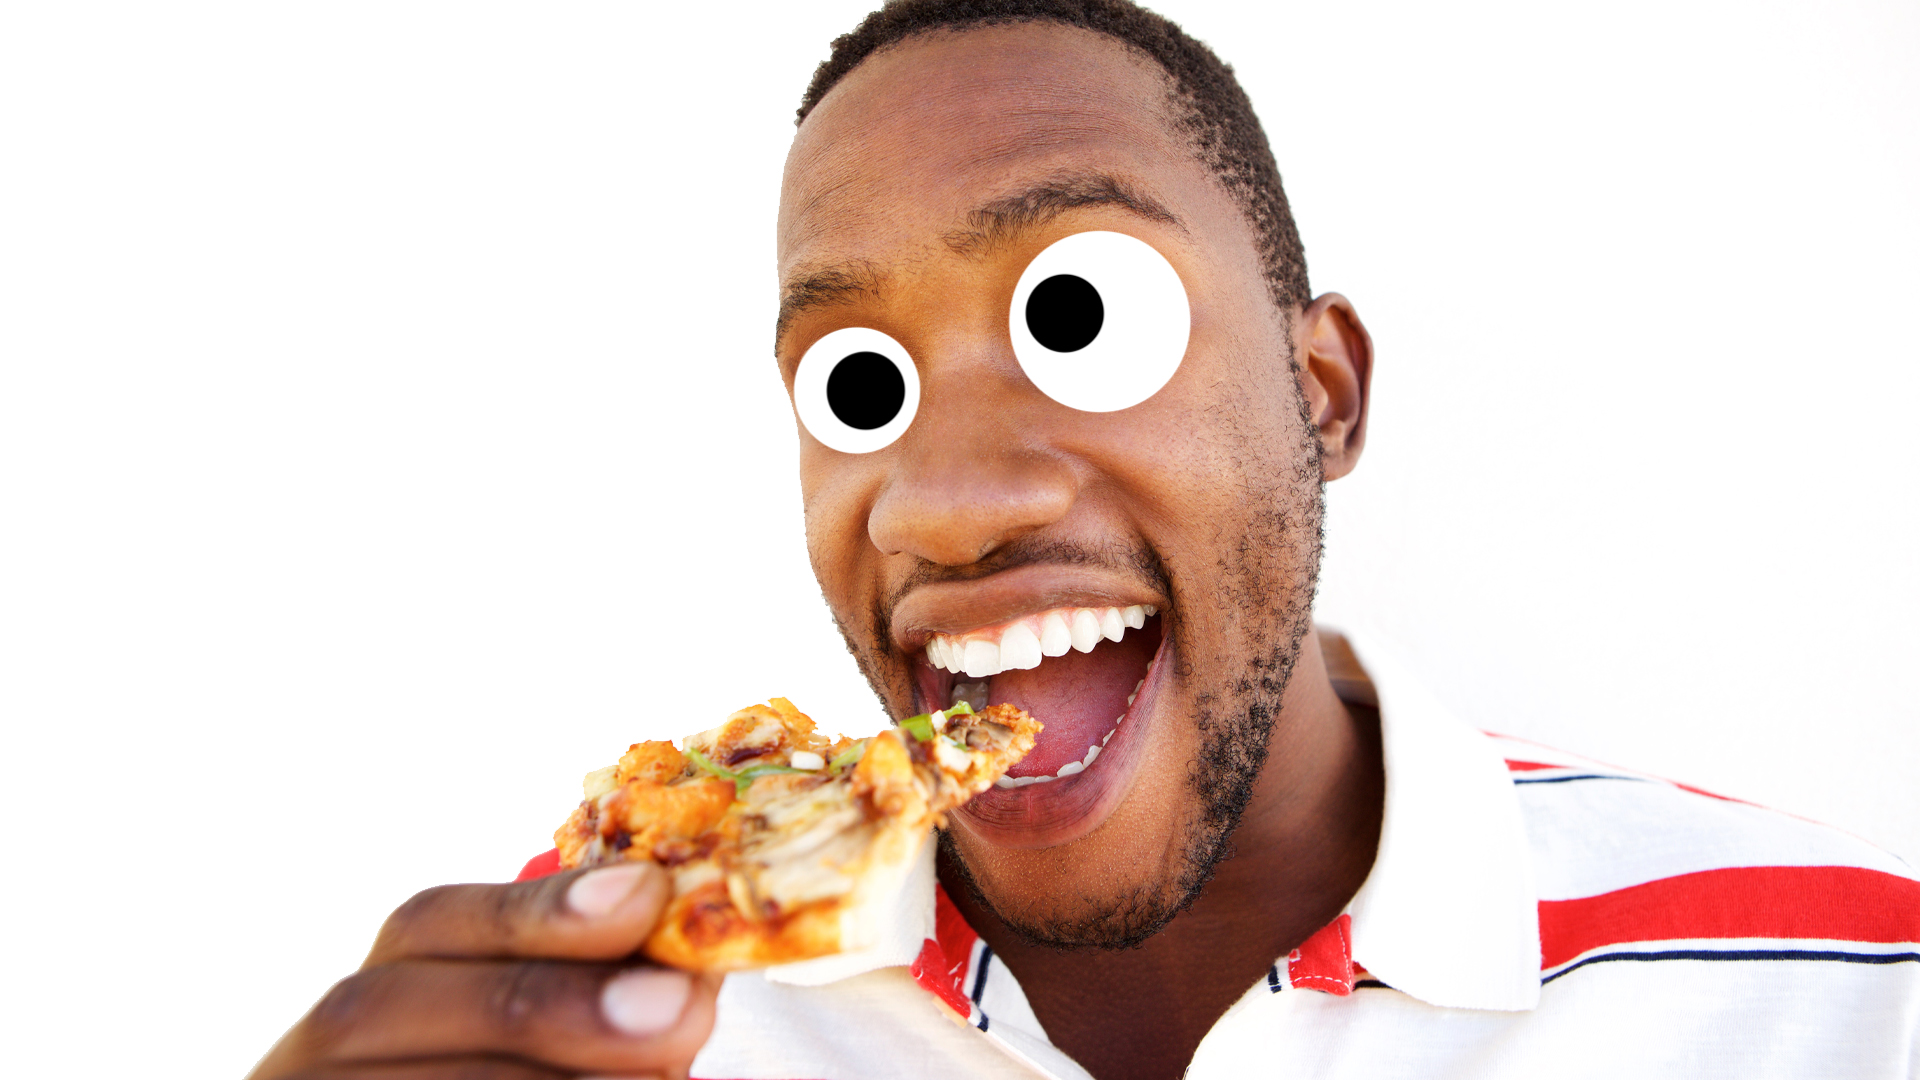 A man eating a slice of pizza